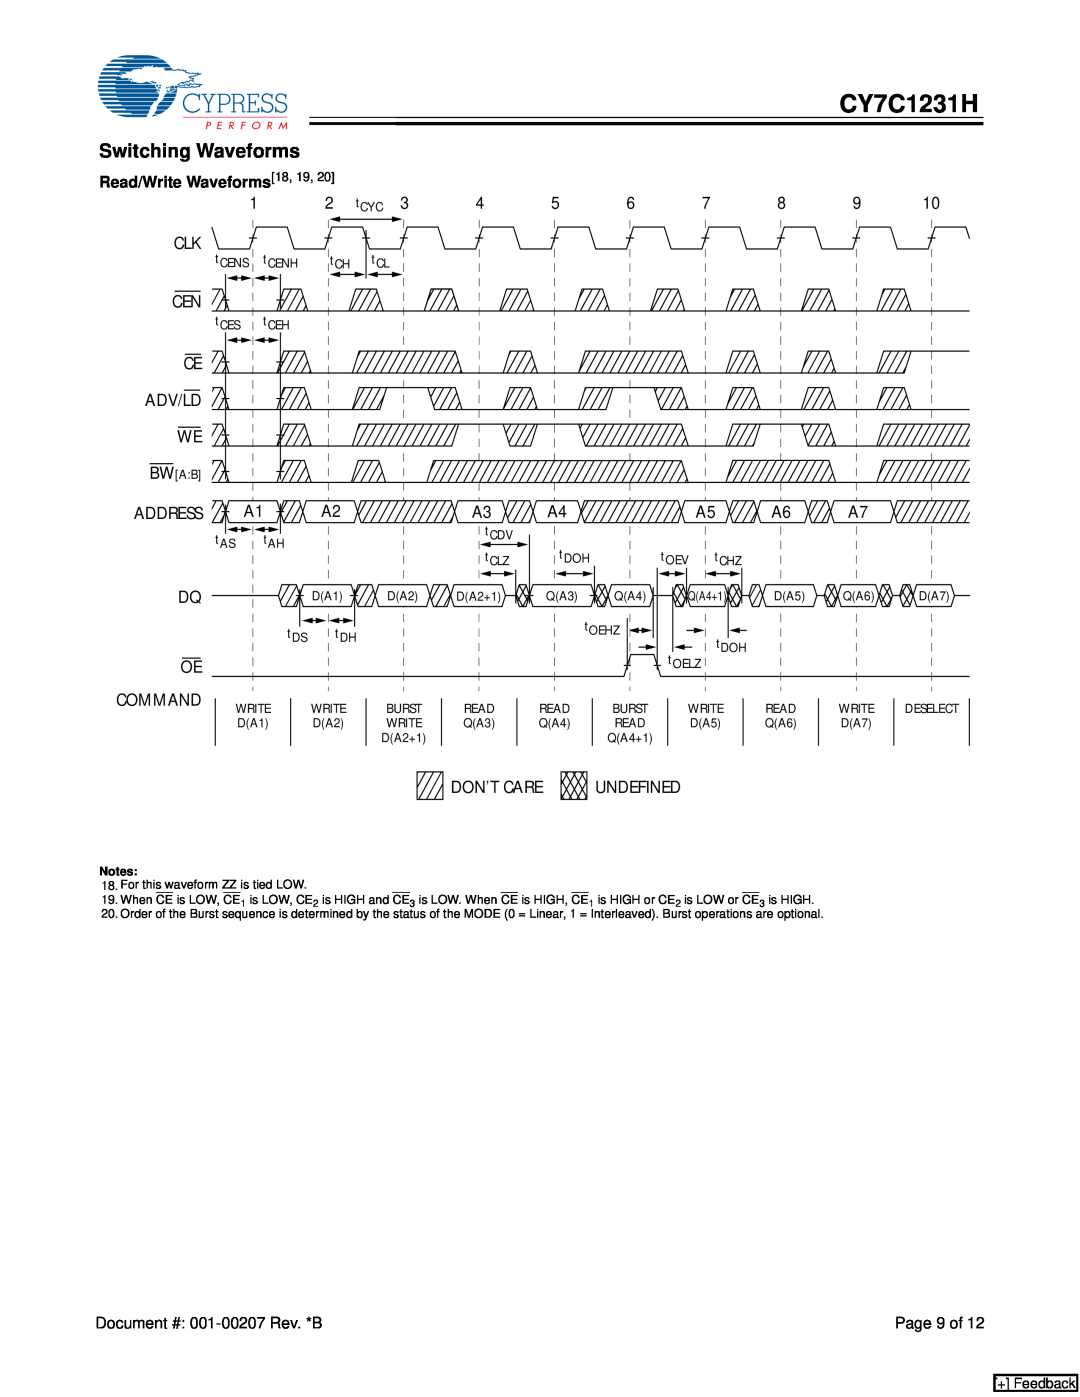 Cypress CY7C1231H manual Switching Waveforms 